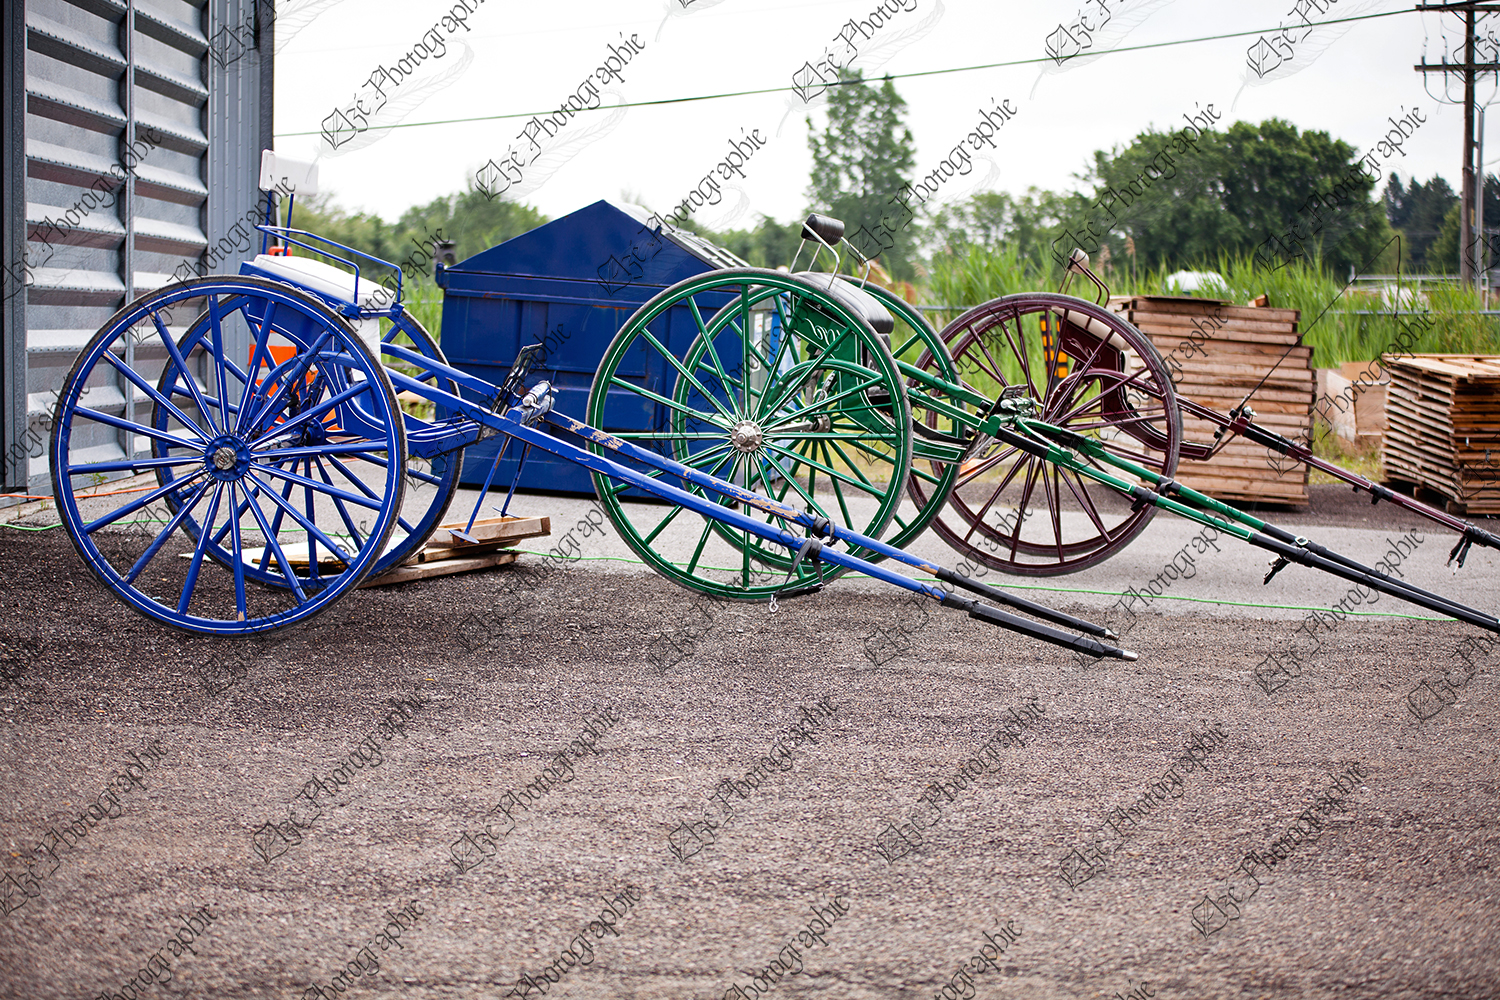 elze_photo_6592_chariot_spectacle_attelage_cart_coupling